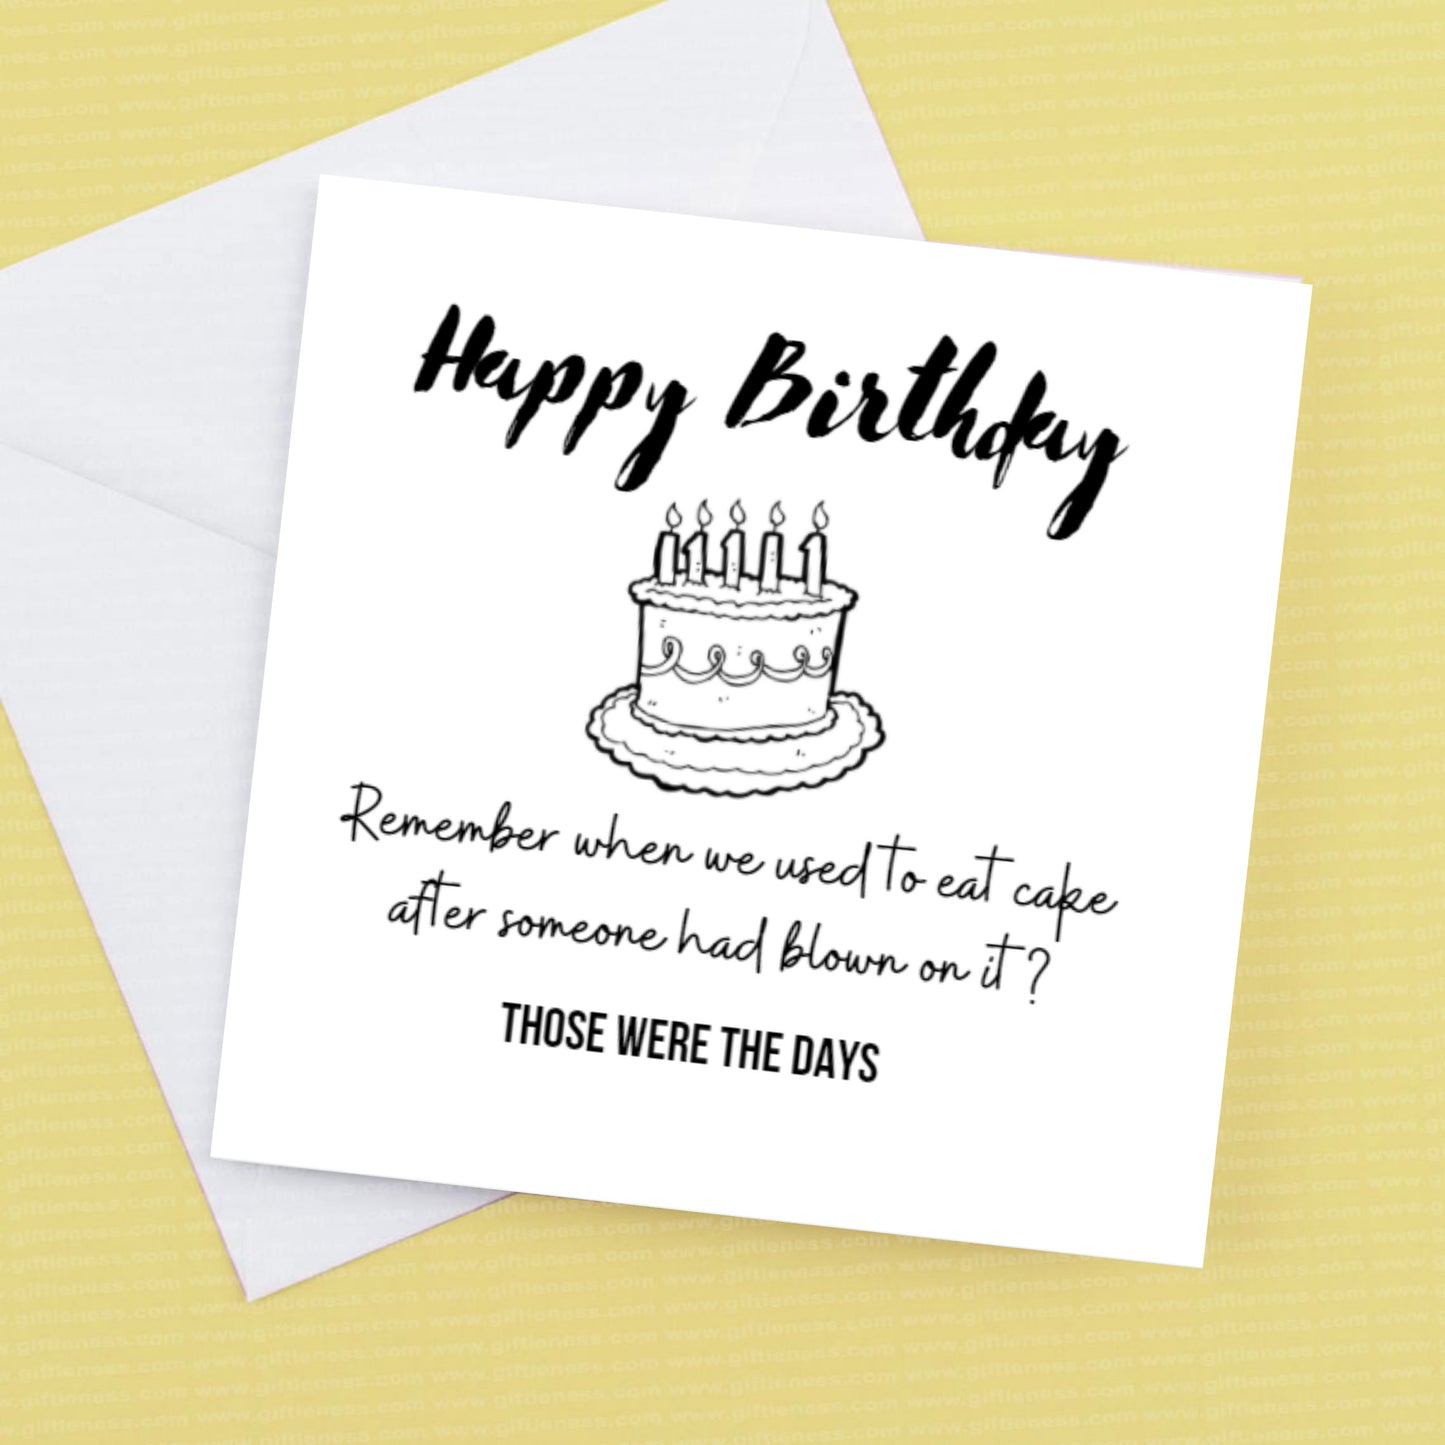 Happy Birthday Card - Remember when we used to eat cake after someone had blown on it